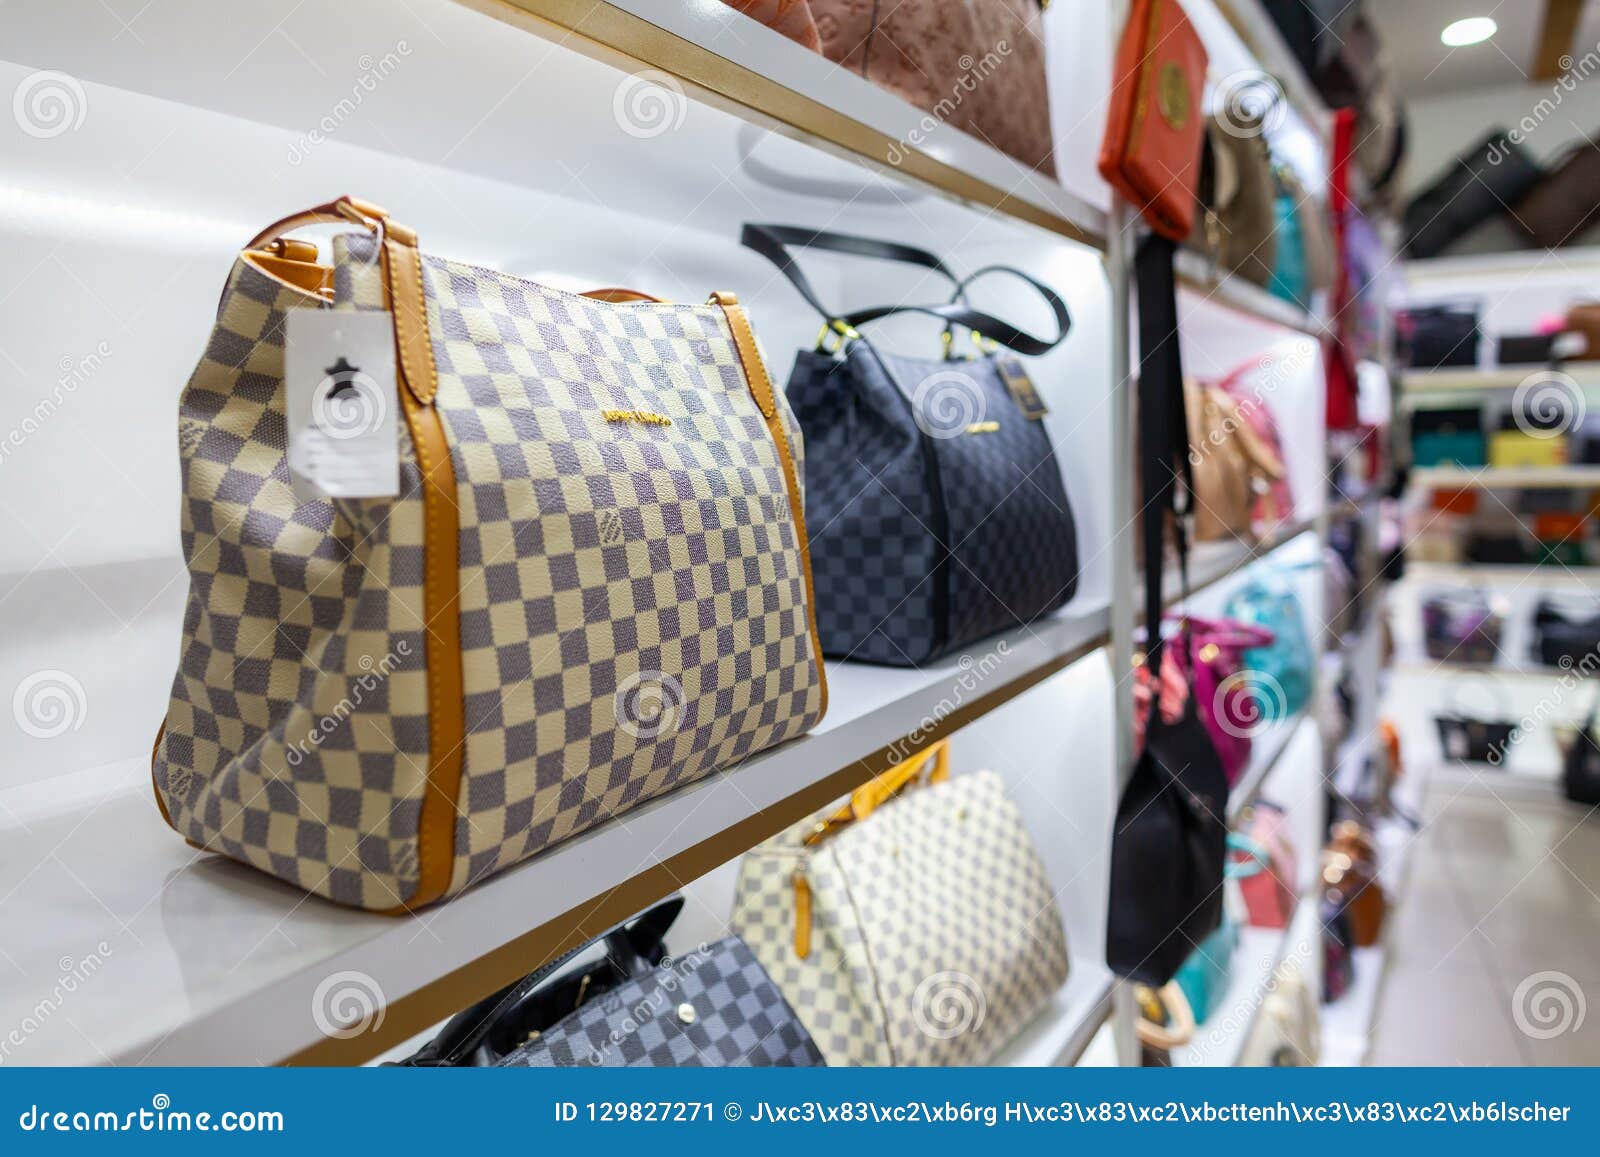 Louis Vuitton Handbags Stans in a Shop Editorial Photo - Image of